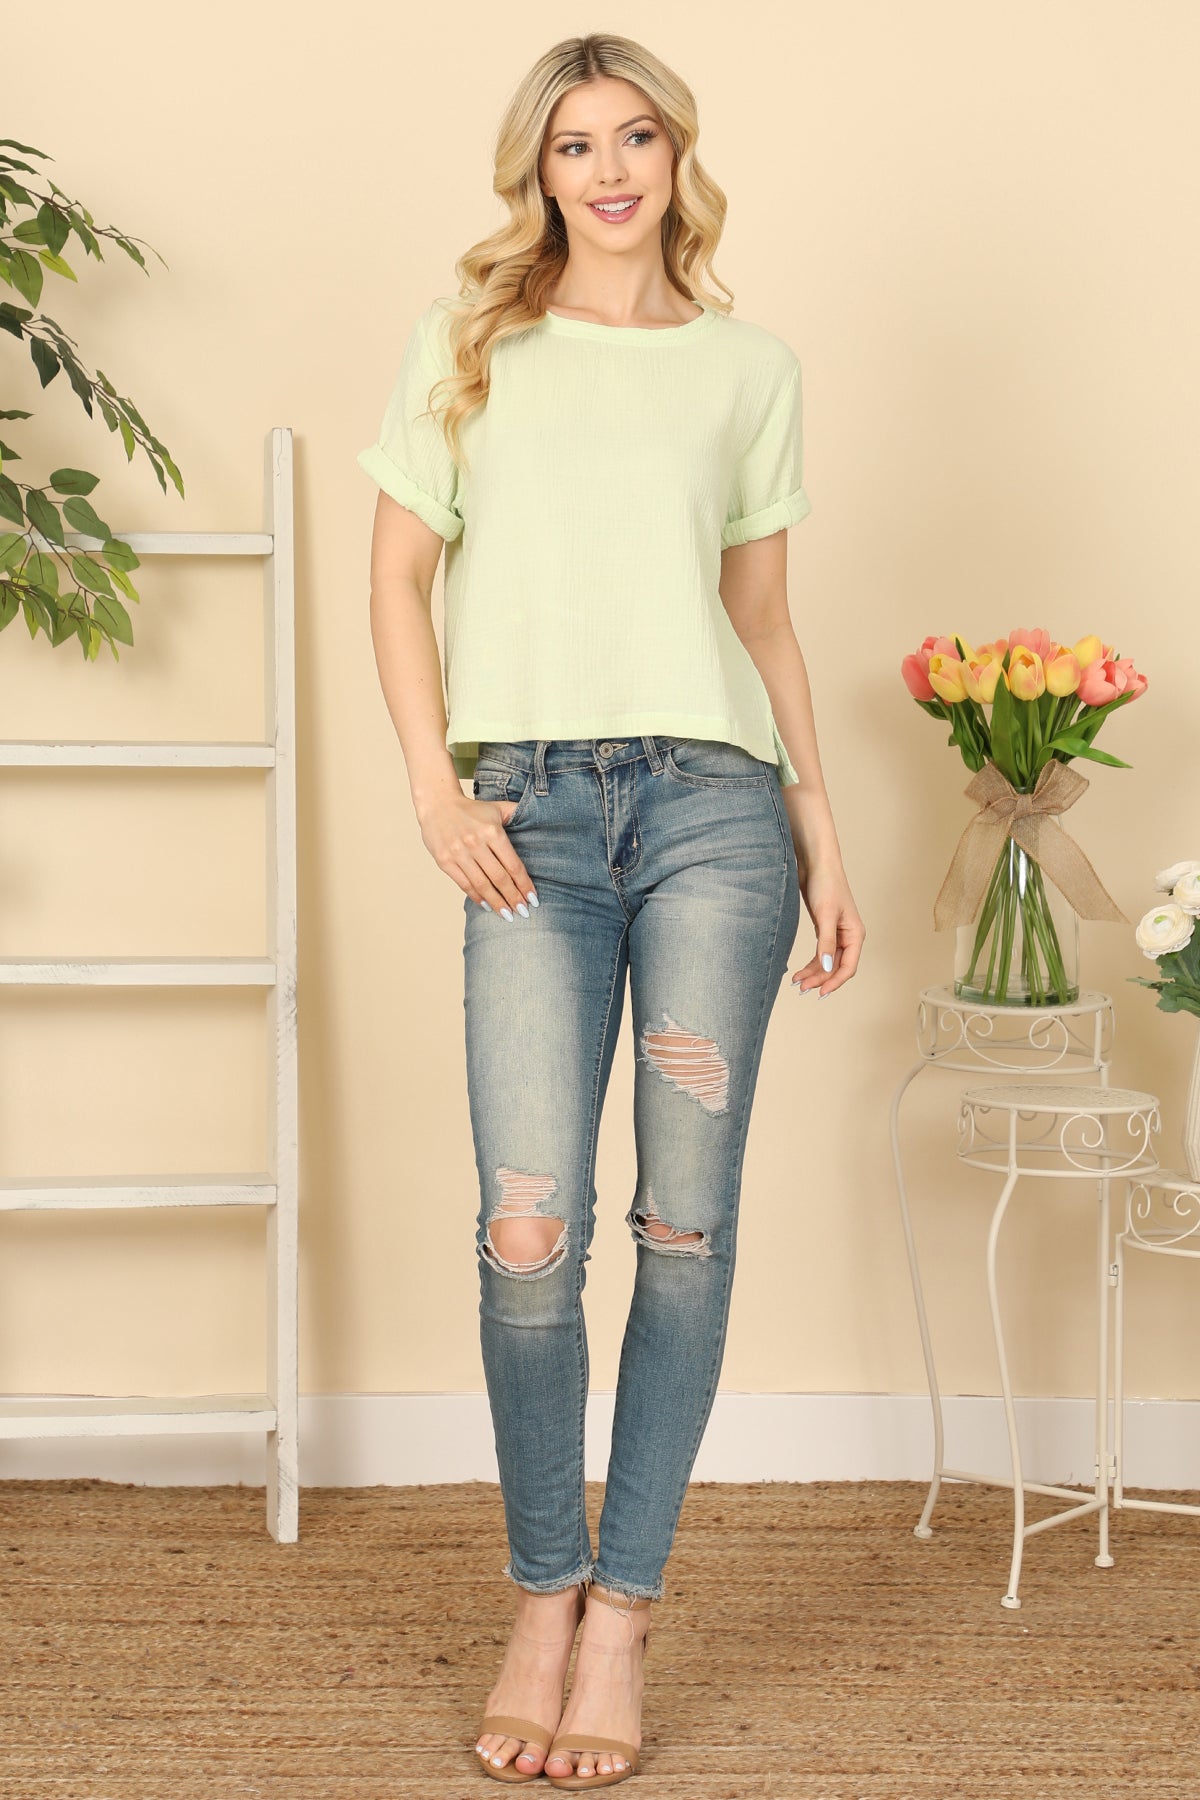 SHORT SLEEVE HANGING BLOUSE SOLID TOP 2-2-1